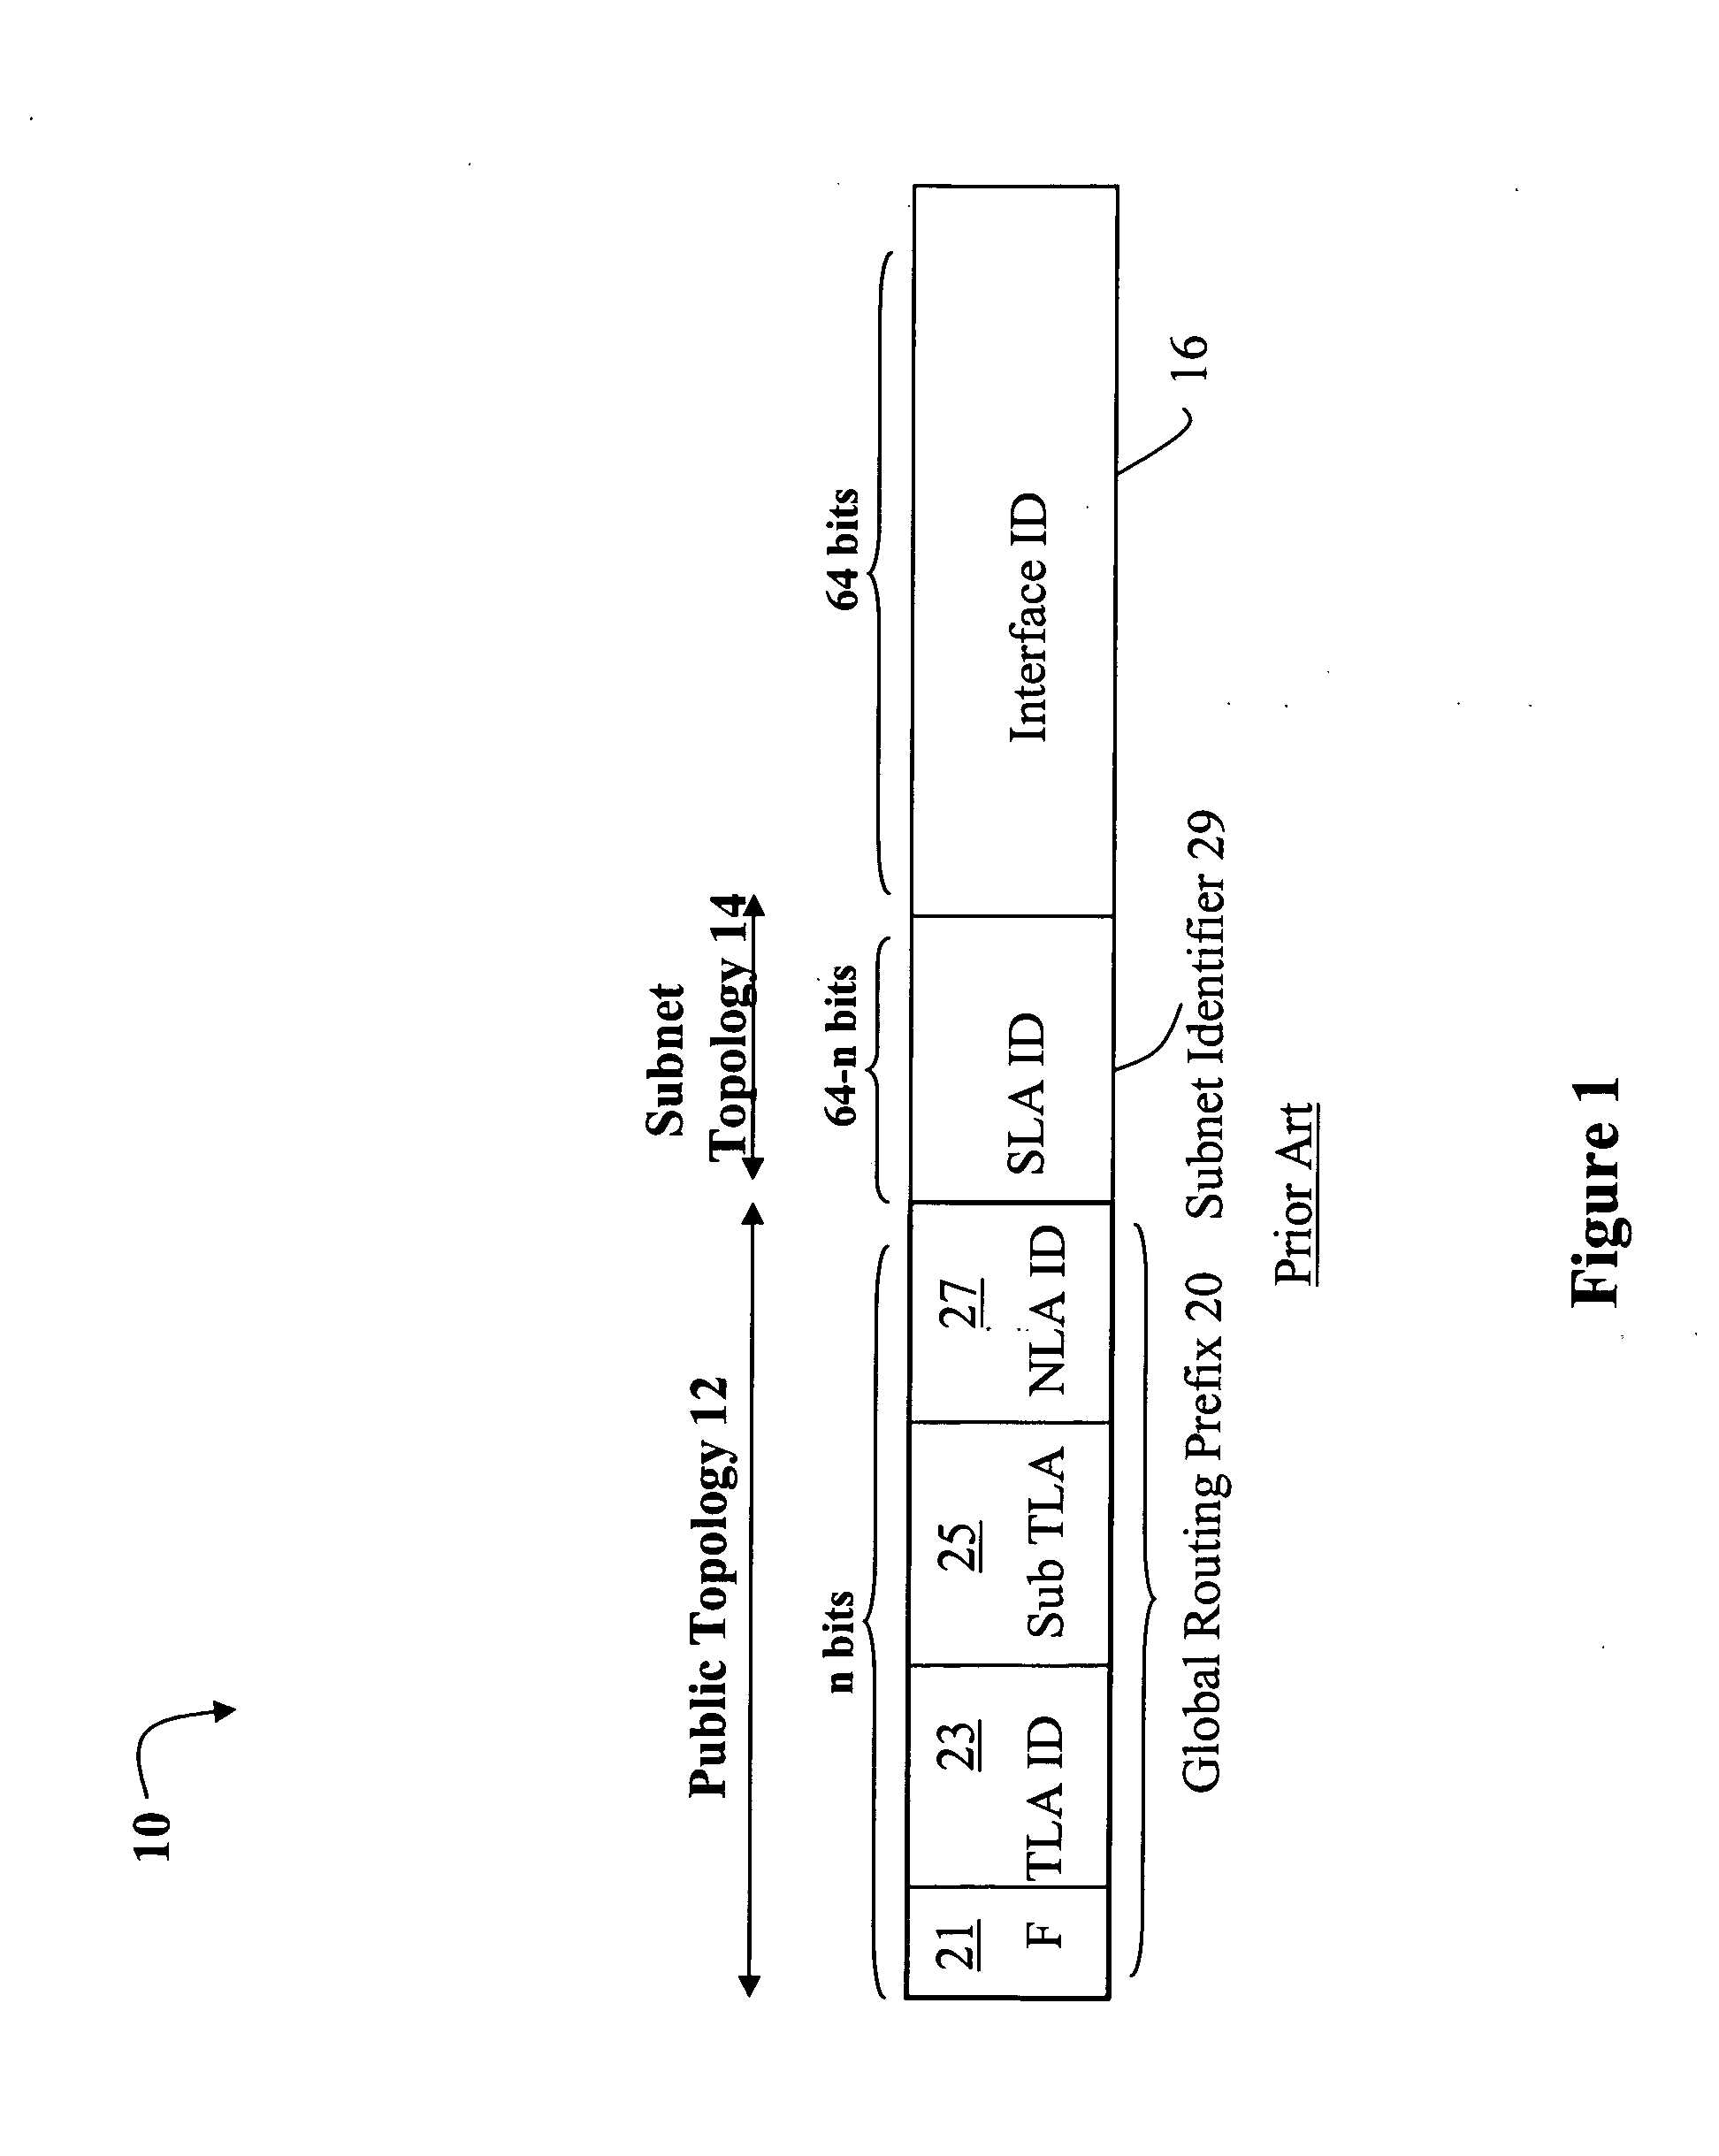 Dynamic hierarchical address resource management architecture, method and apparatus